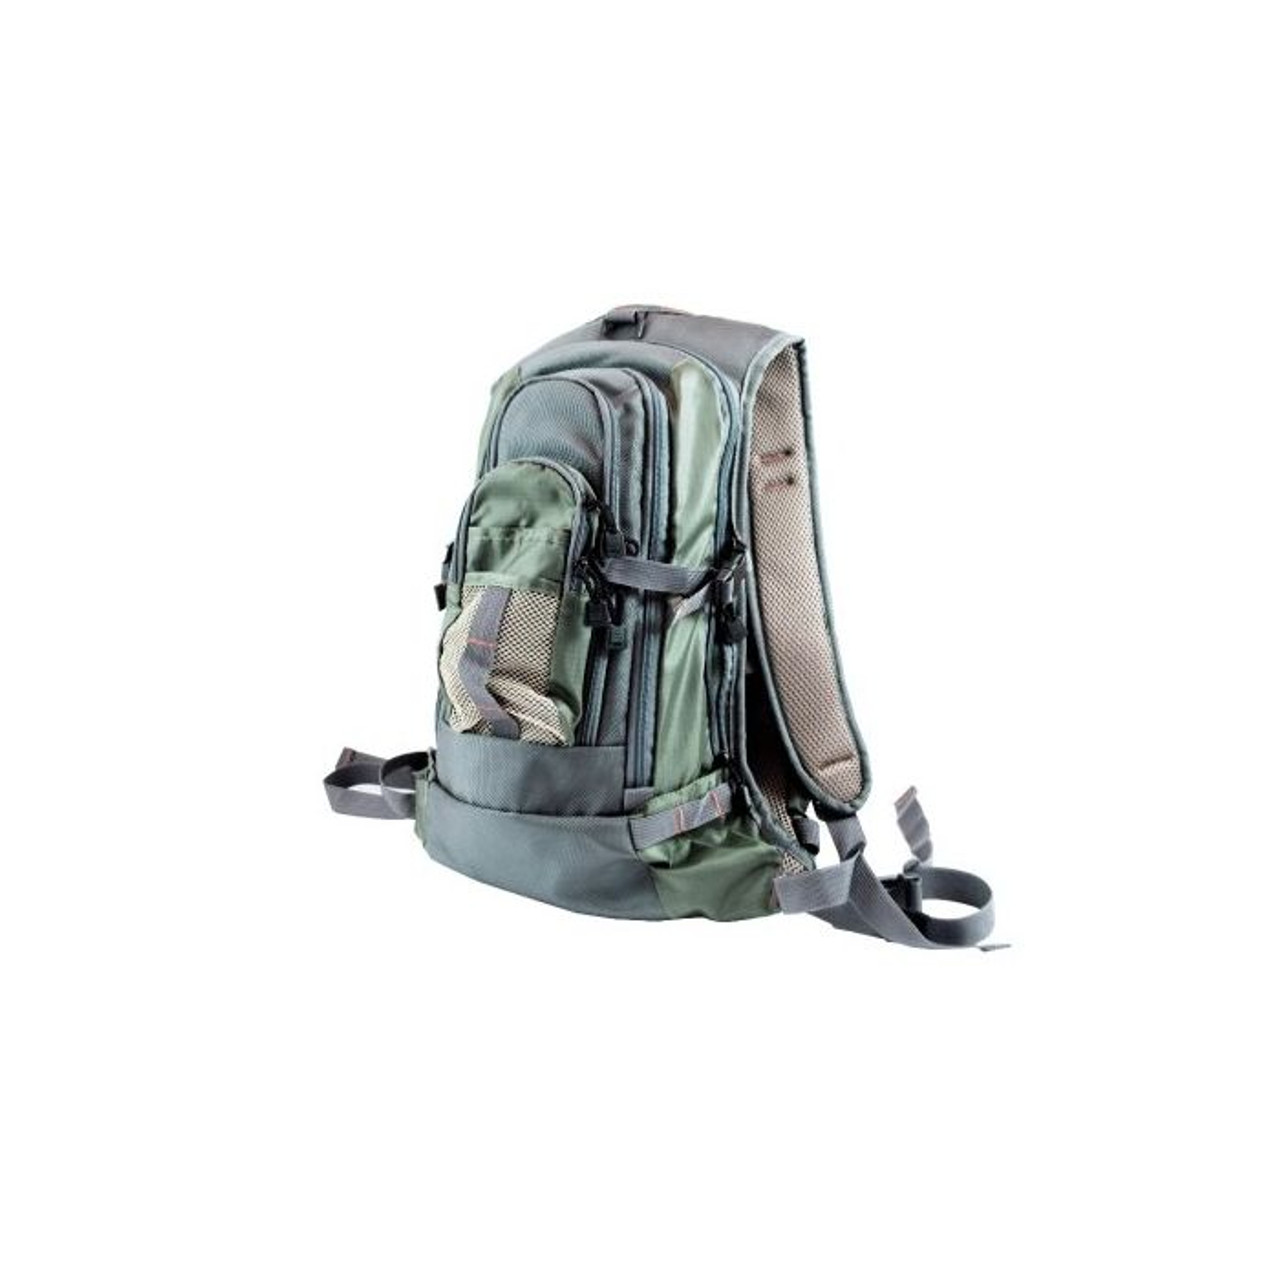 Wading Backpack with Chest Bag - Green/Tan